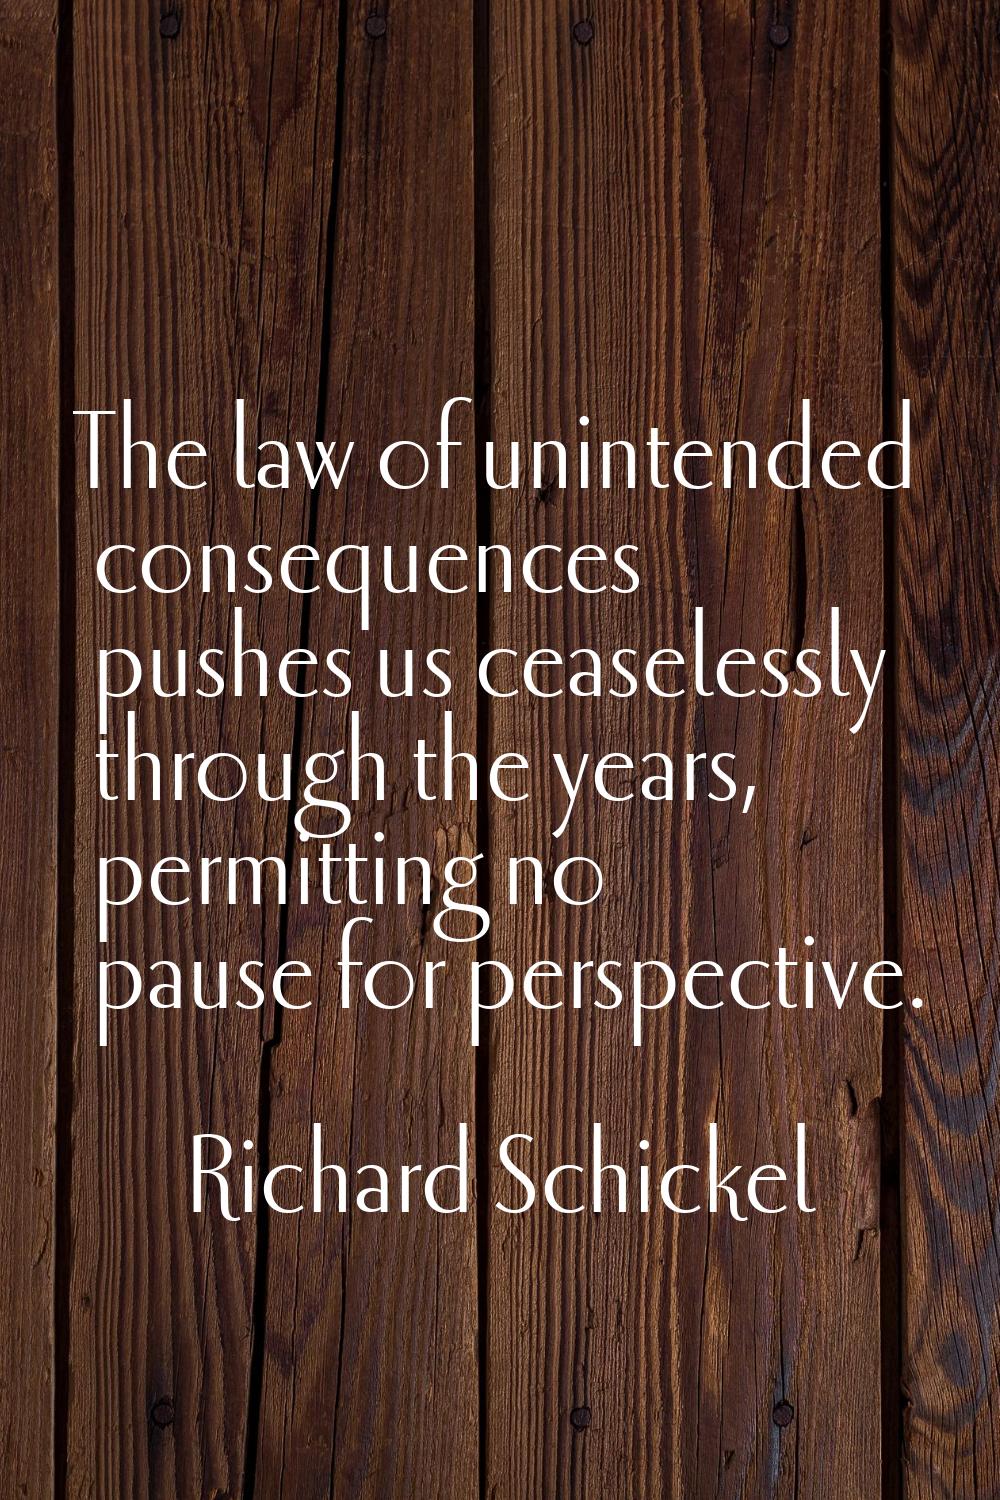 The law of unintended consequences pushes us ceaselessly through the years, permitting no pause for